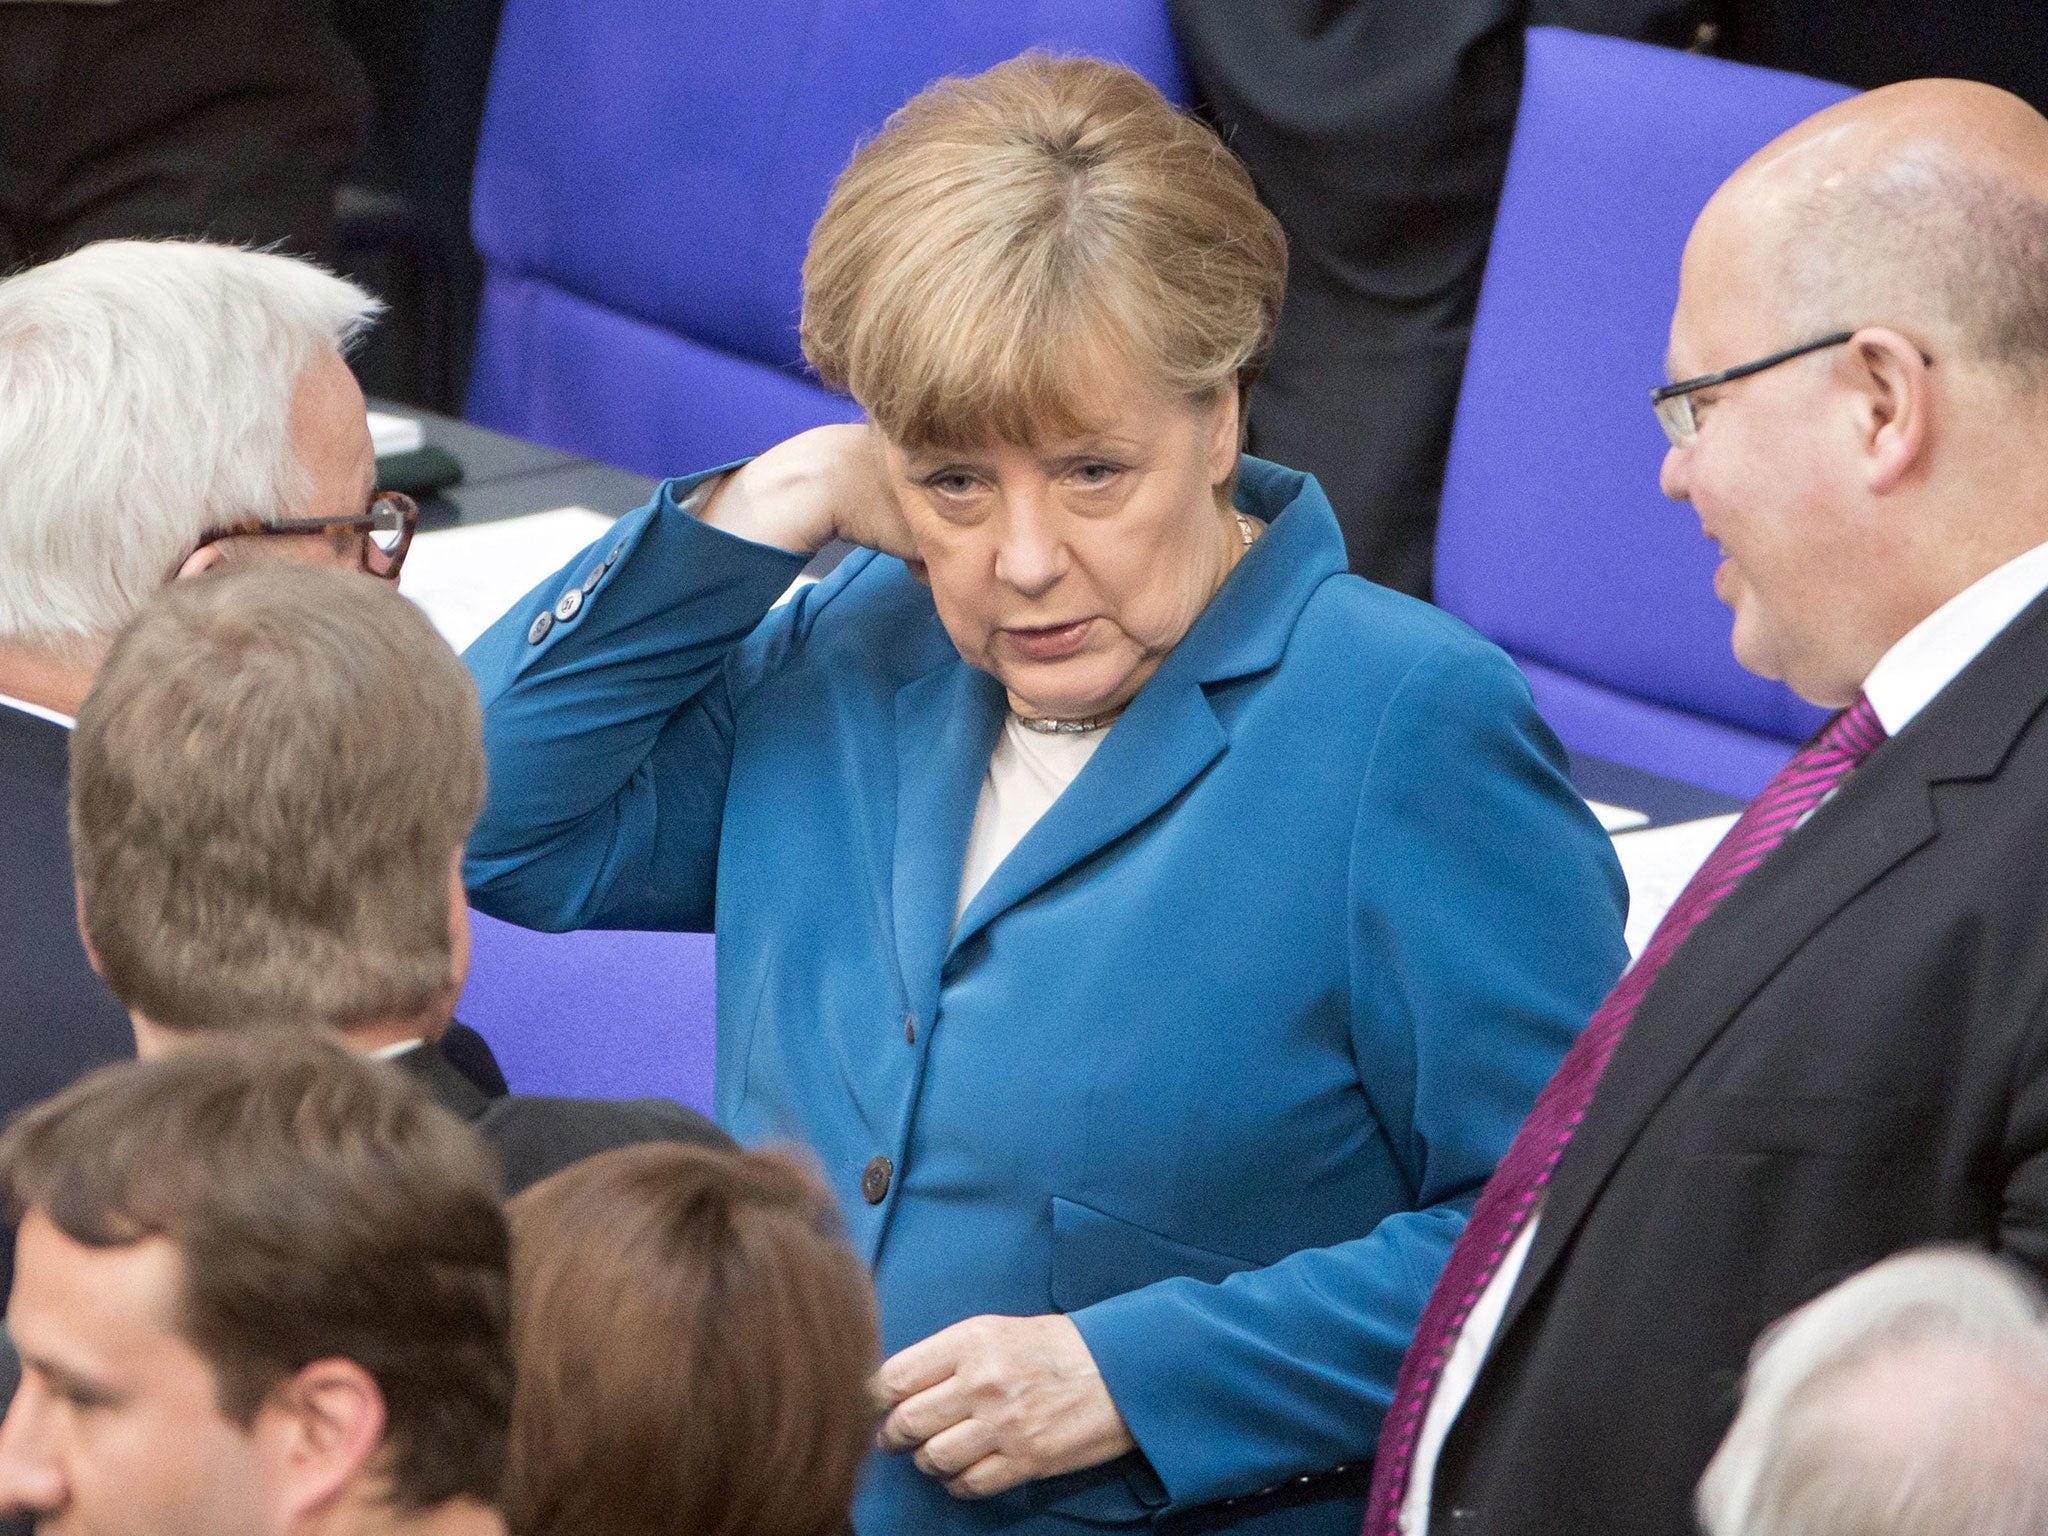 German Chancellor Angela Merkel (C) during a session of the German parliament Bundestag in Berlin, Germany, 13 May 2016